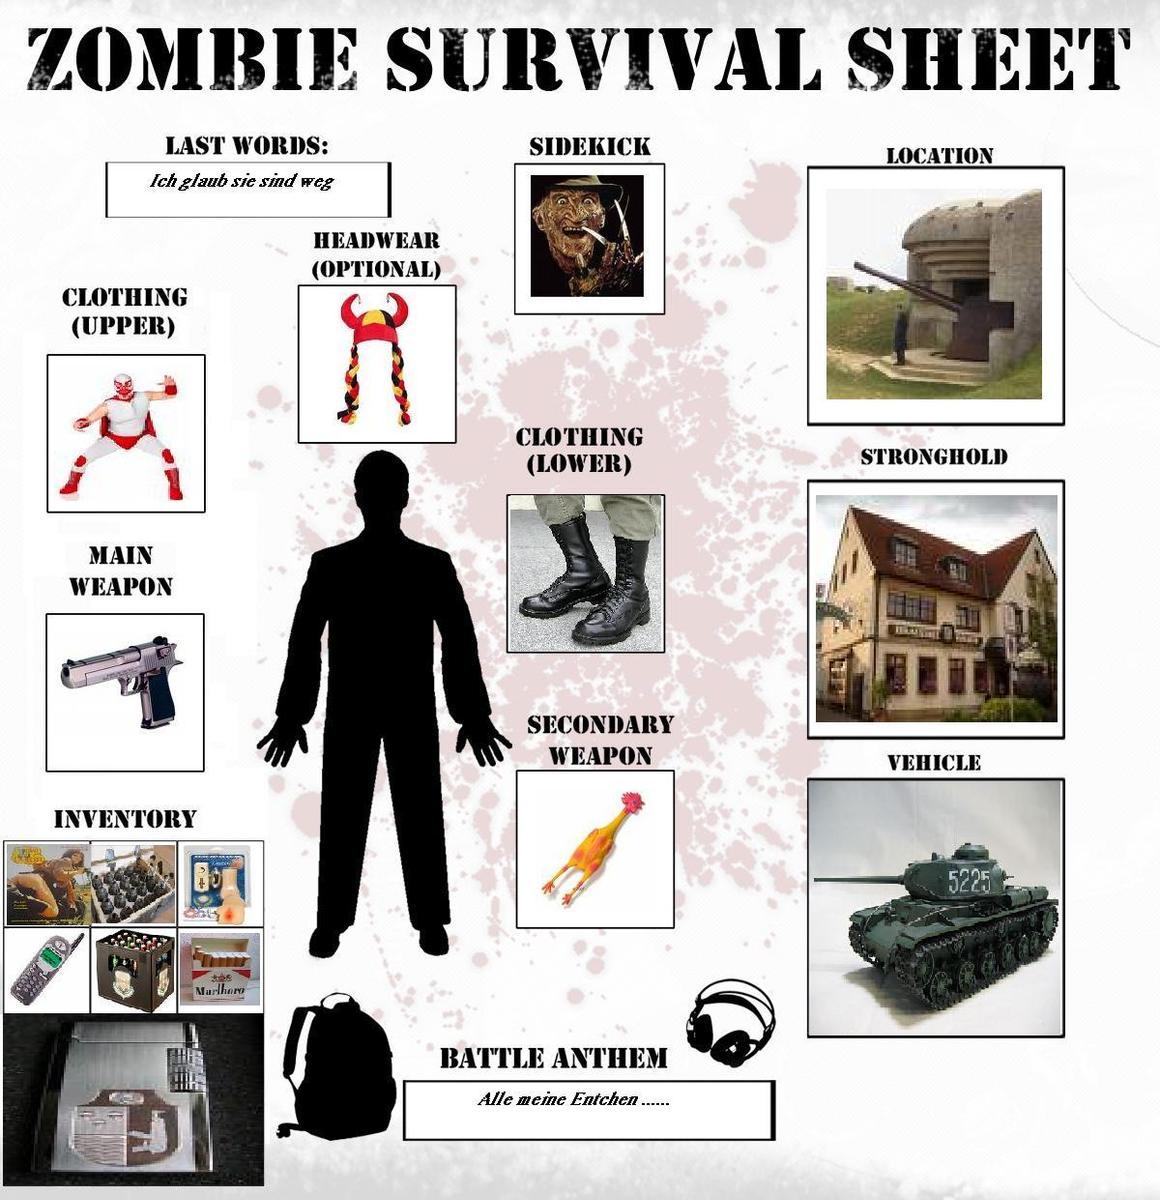 /dateien/uh61294,1268916341,uh612941268911386Zombie Survival Sheet Template by MrAlf